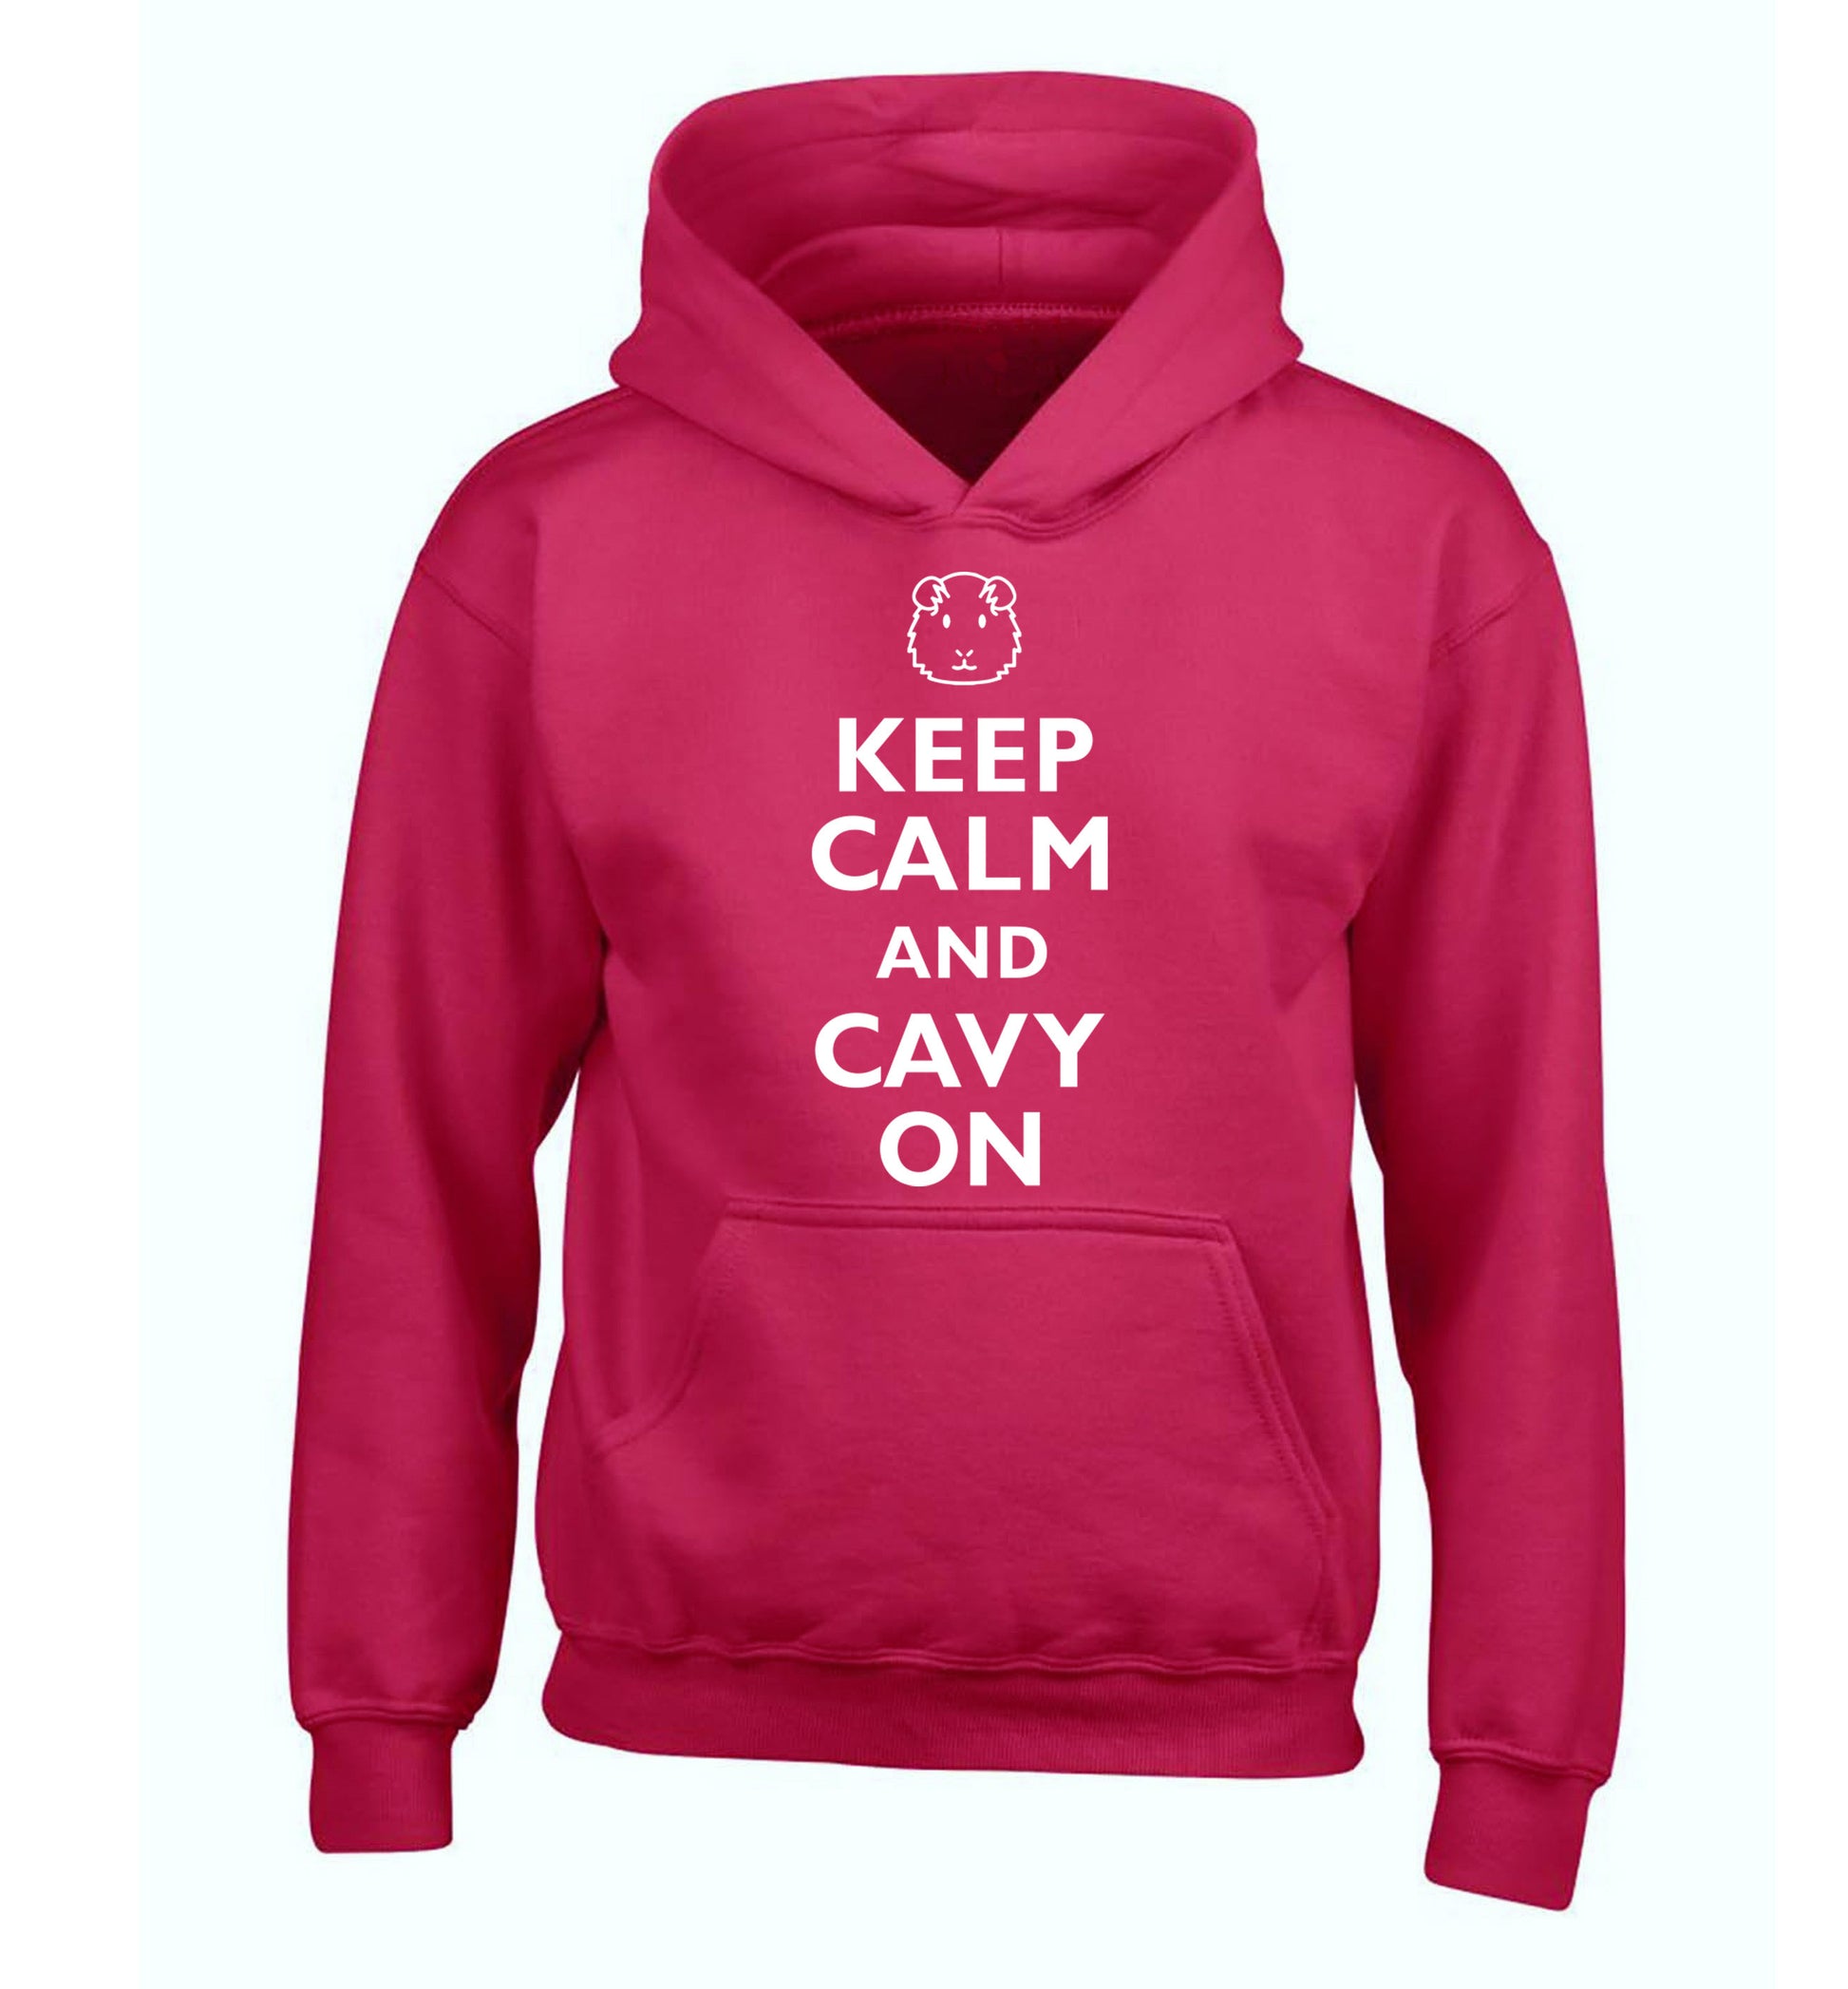 Keep calm and cavvy on children's pink hoodie 12-14 Years